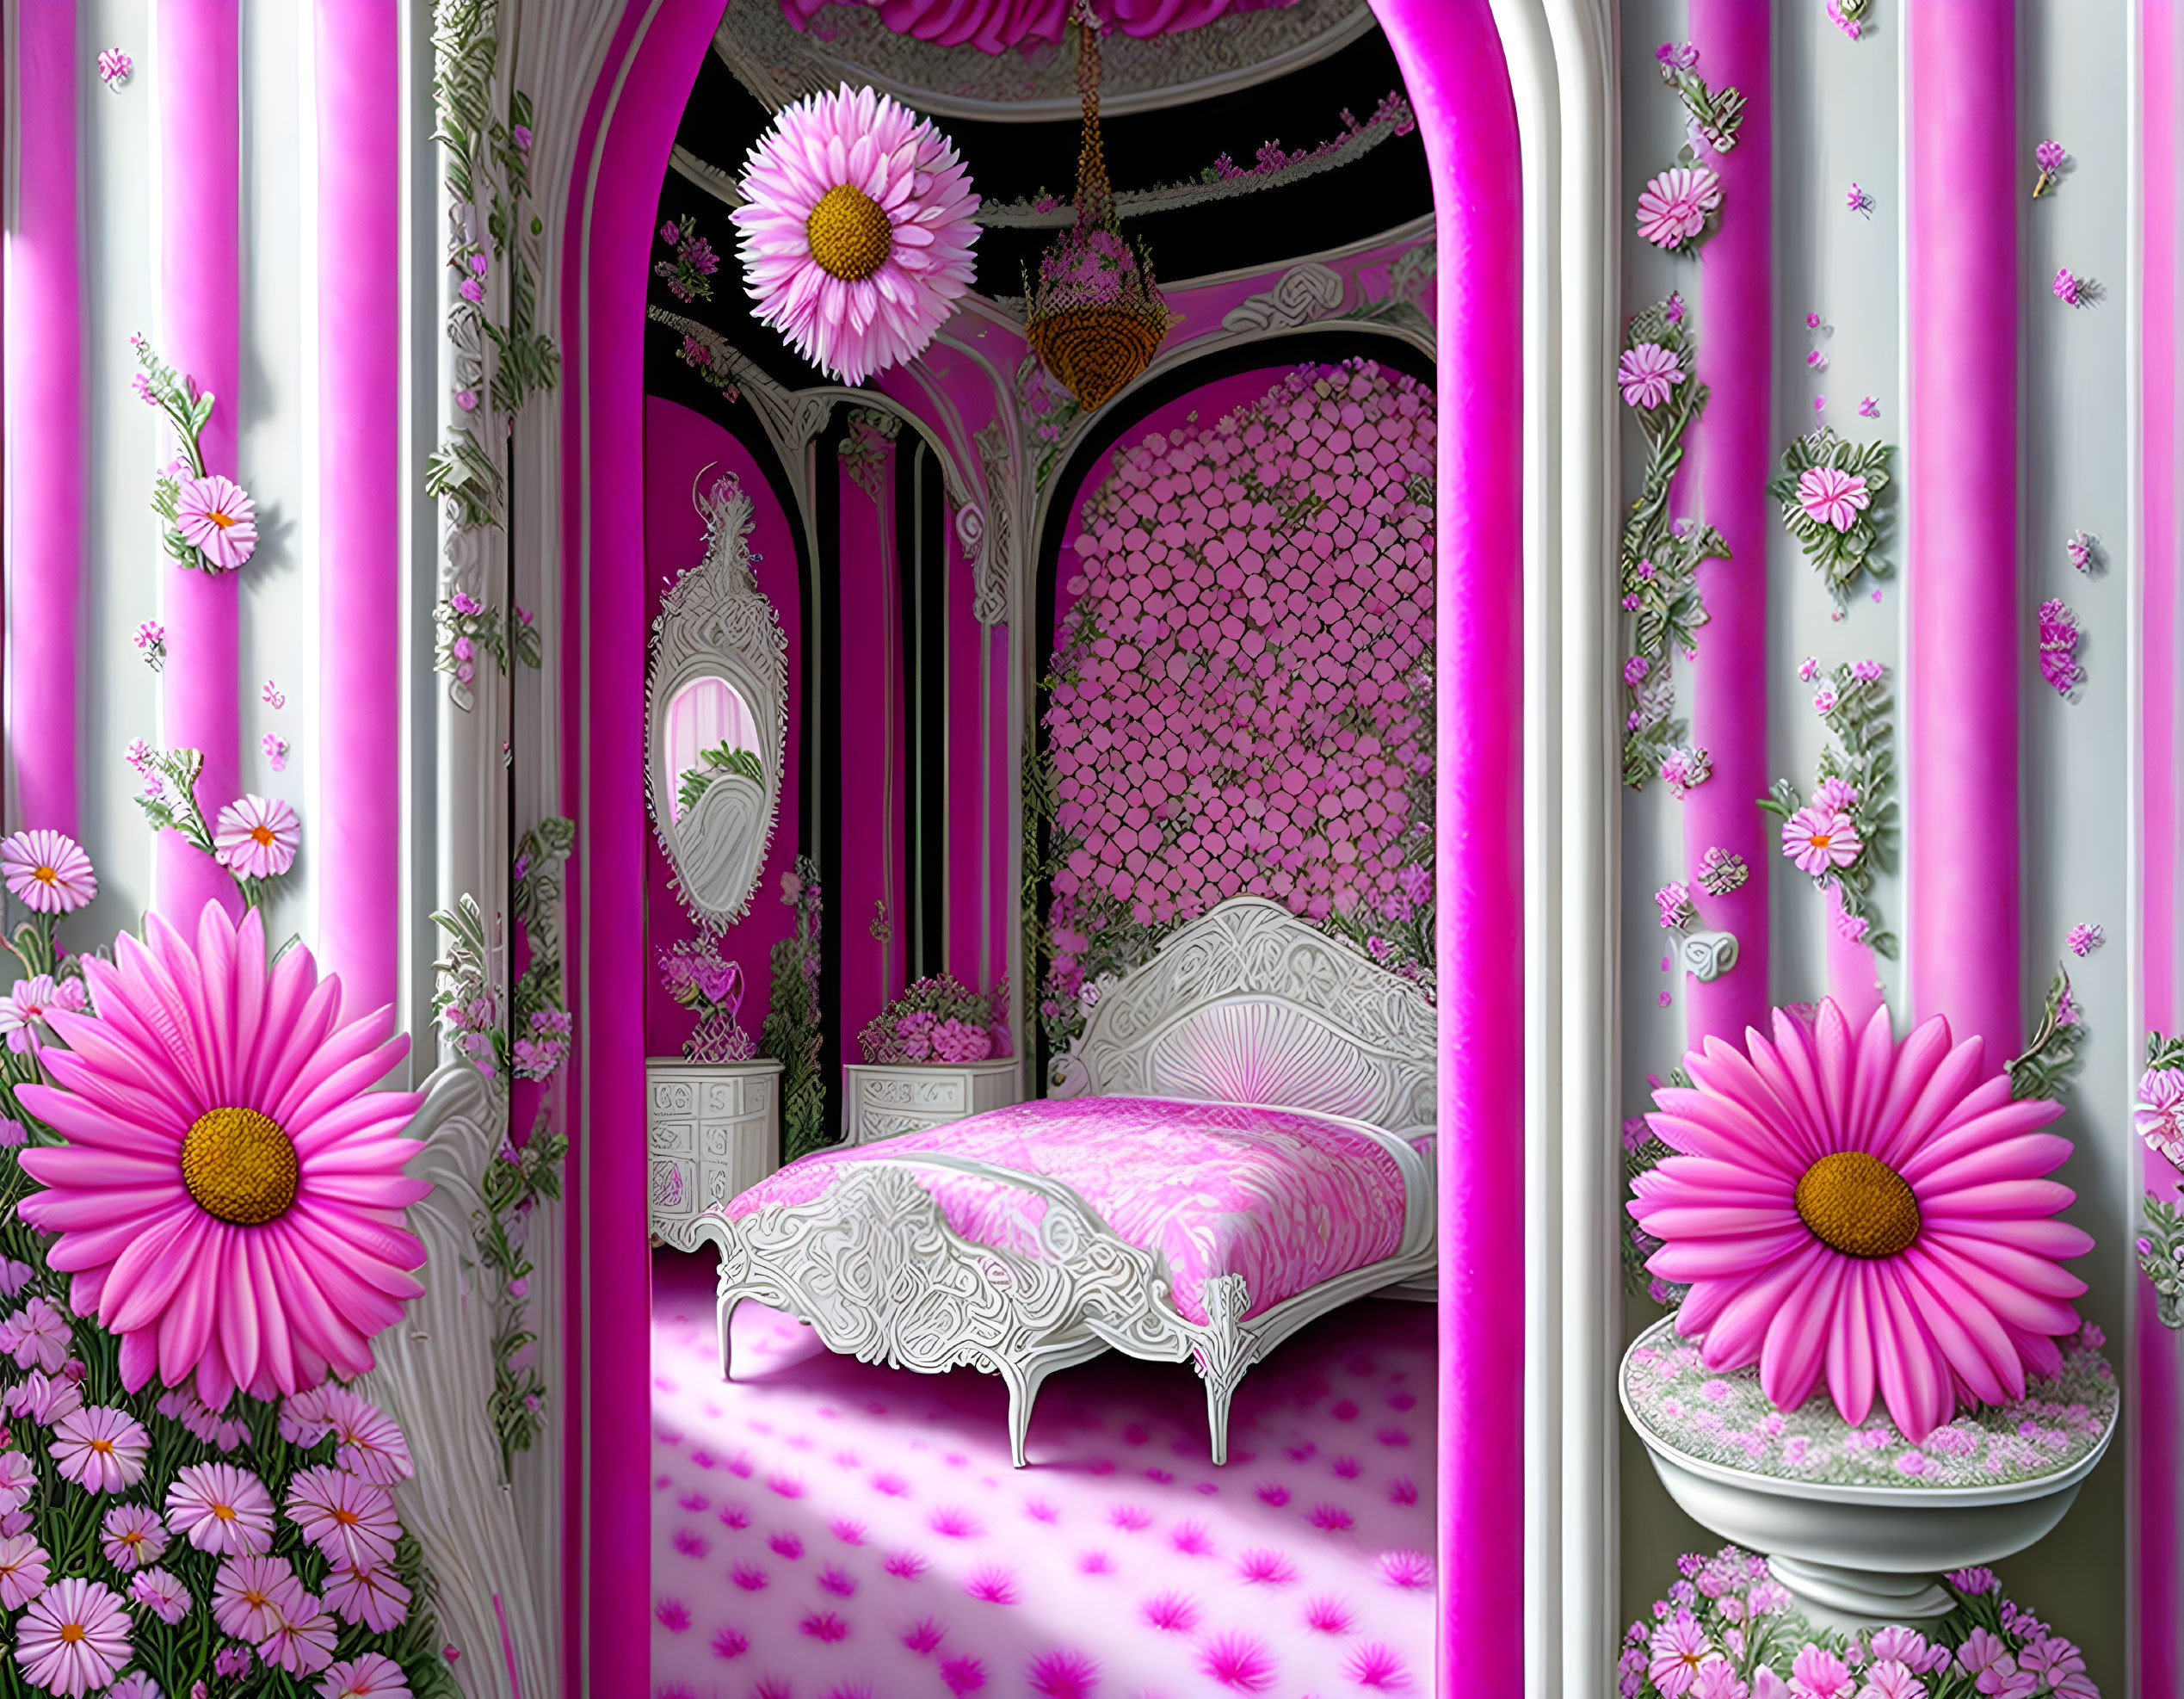 Fantasy bedroom with pink floral decor and ornate white furniture